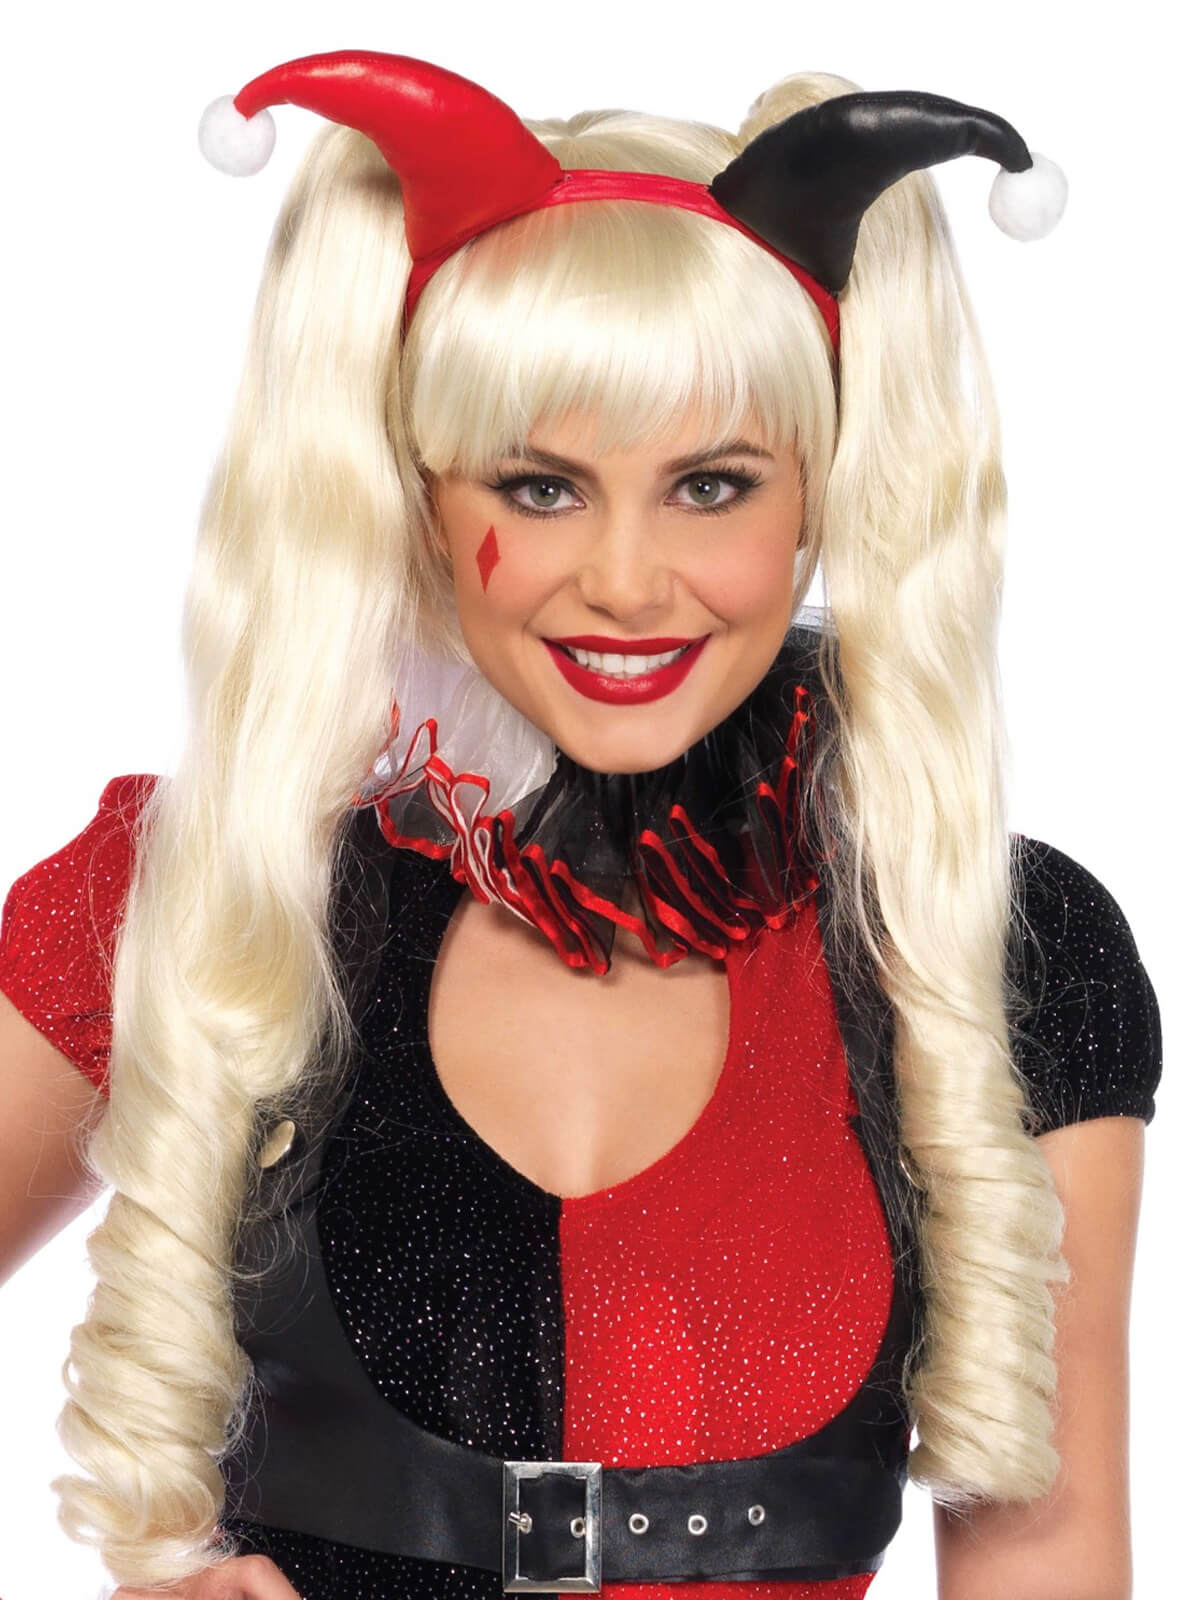 Dolly bob wig with clips - Blonde